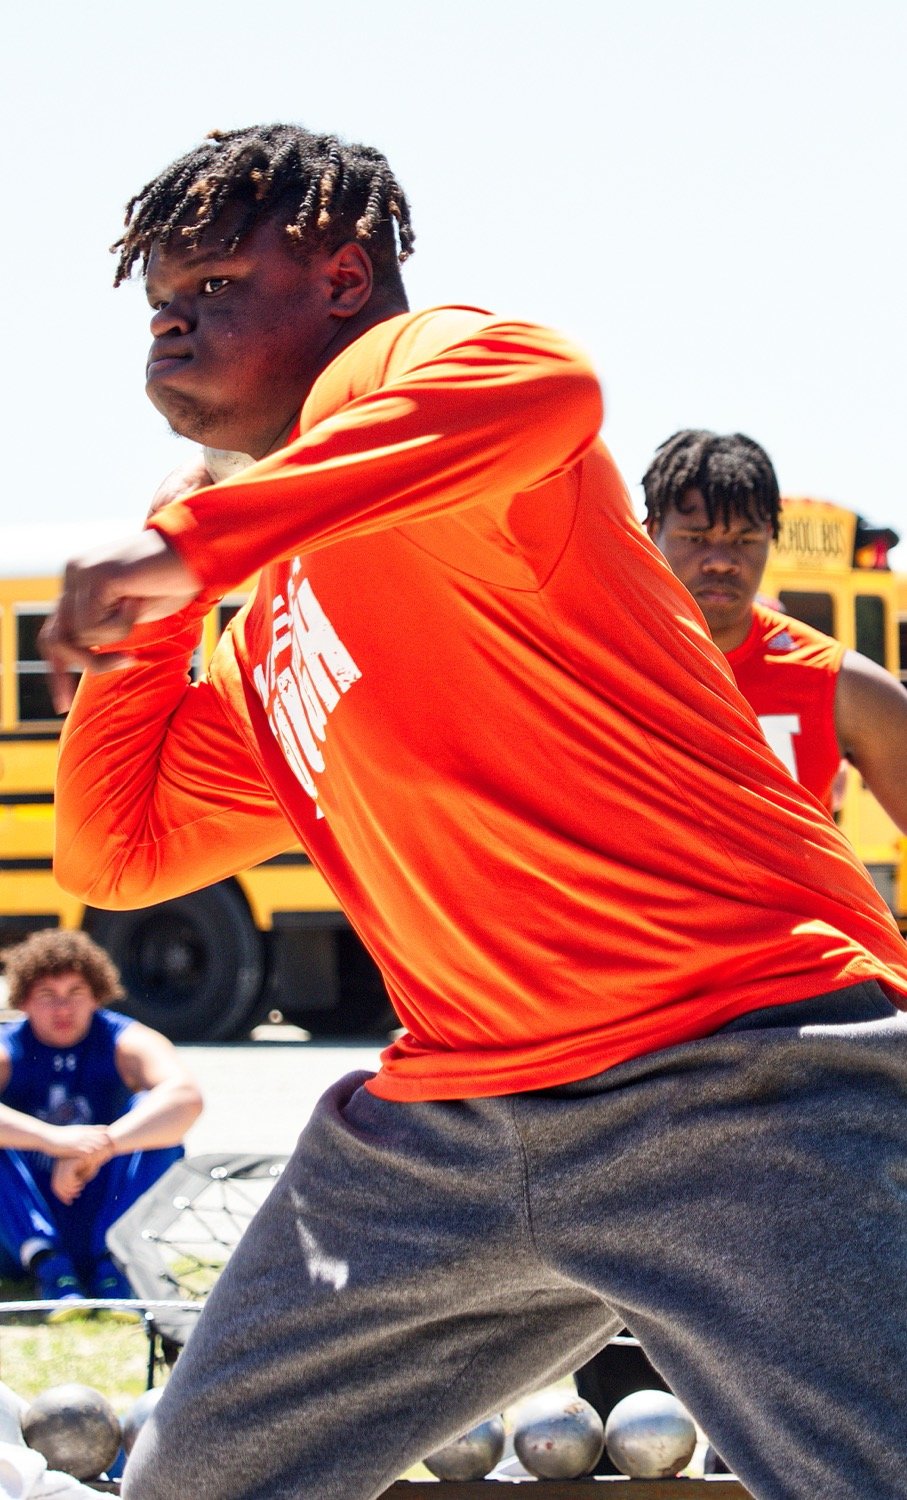 Mineola's D.J. Newsome won district champion in shot-put with a 43’1” heave, followed by fellow Yellowjacket thrower Stephen Ogueri at 41'1.75" in 2nd. [admire more awesome athletics]